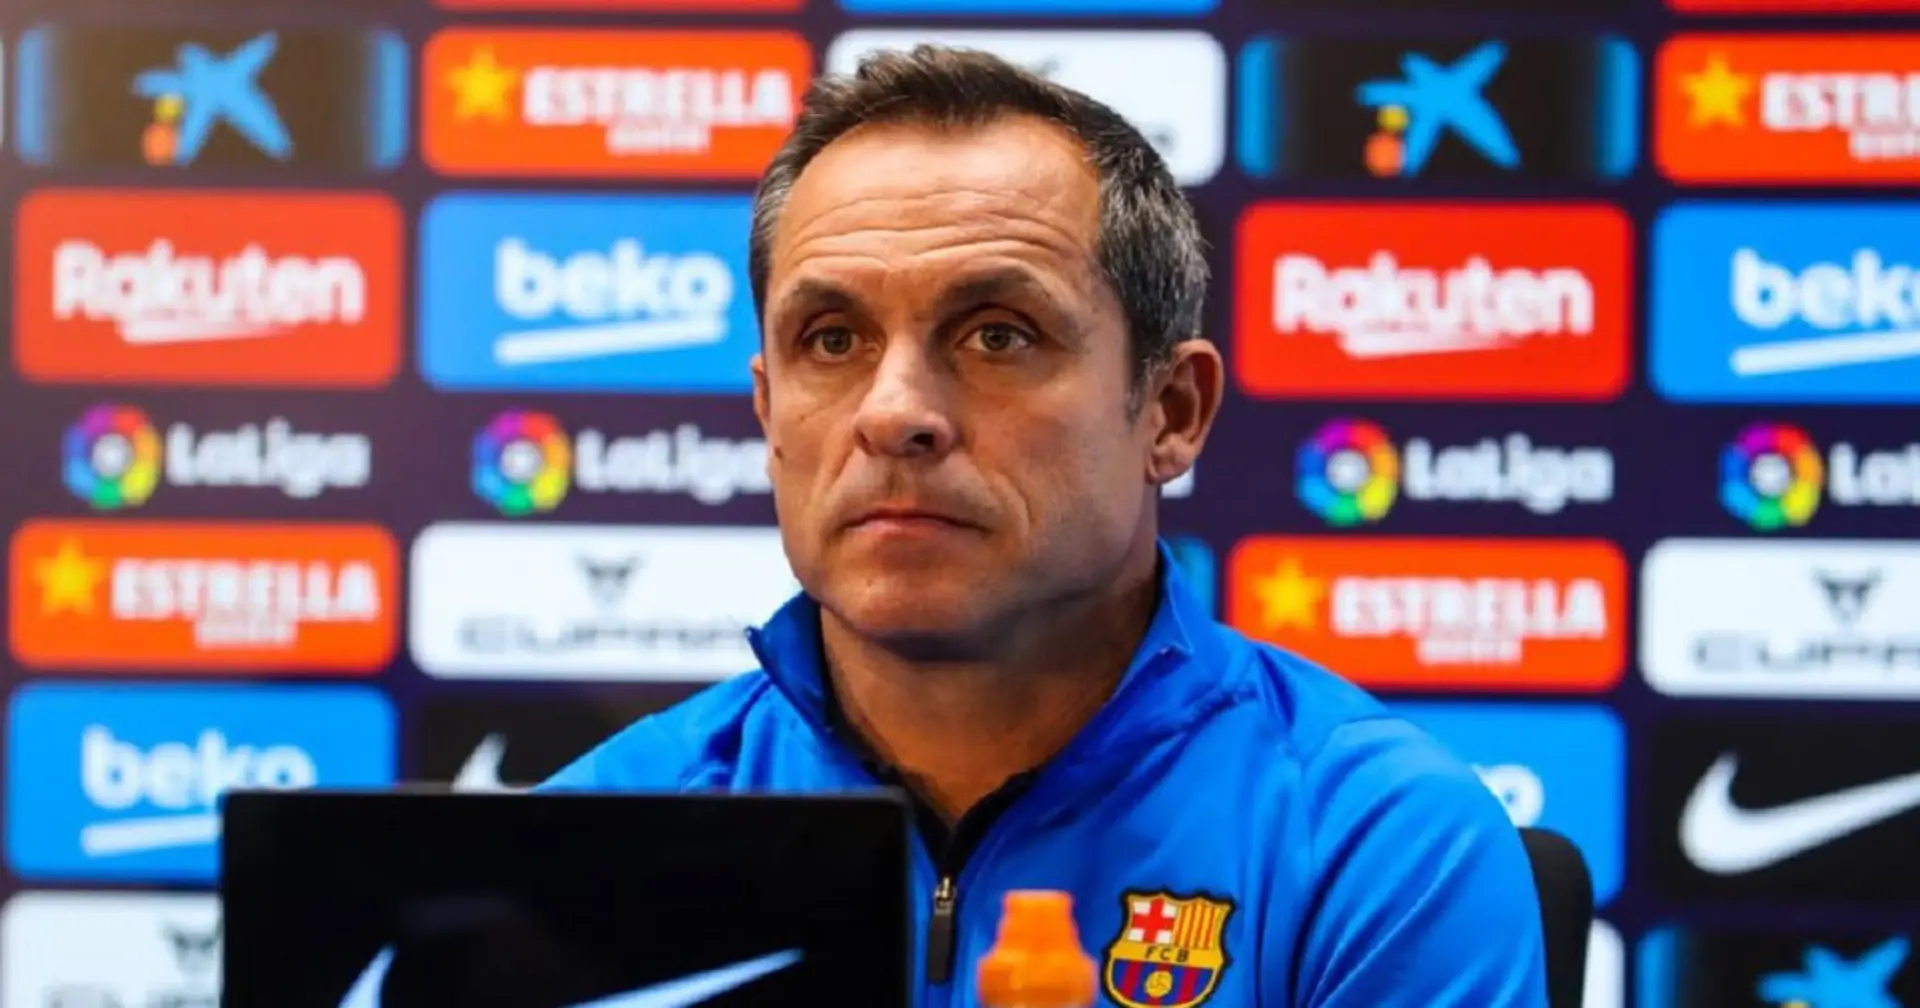 'I'm a winner': Barjuan comments on possible sacking as Barca B struggles continue